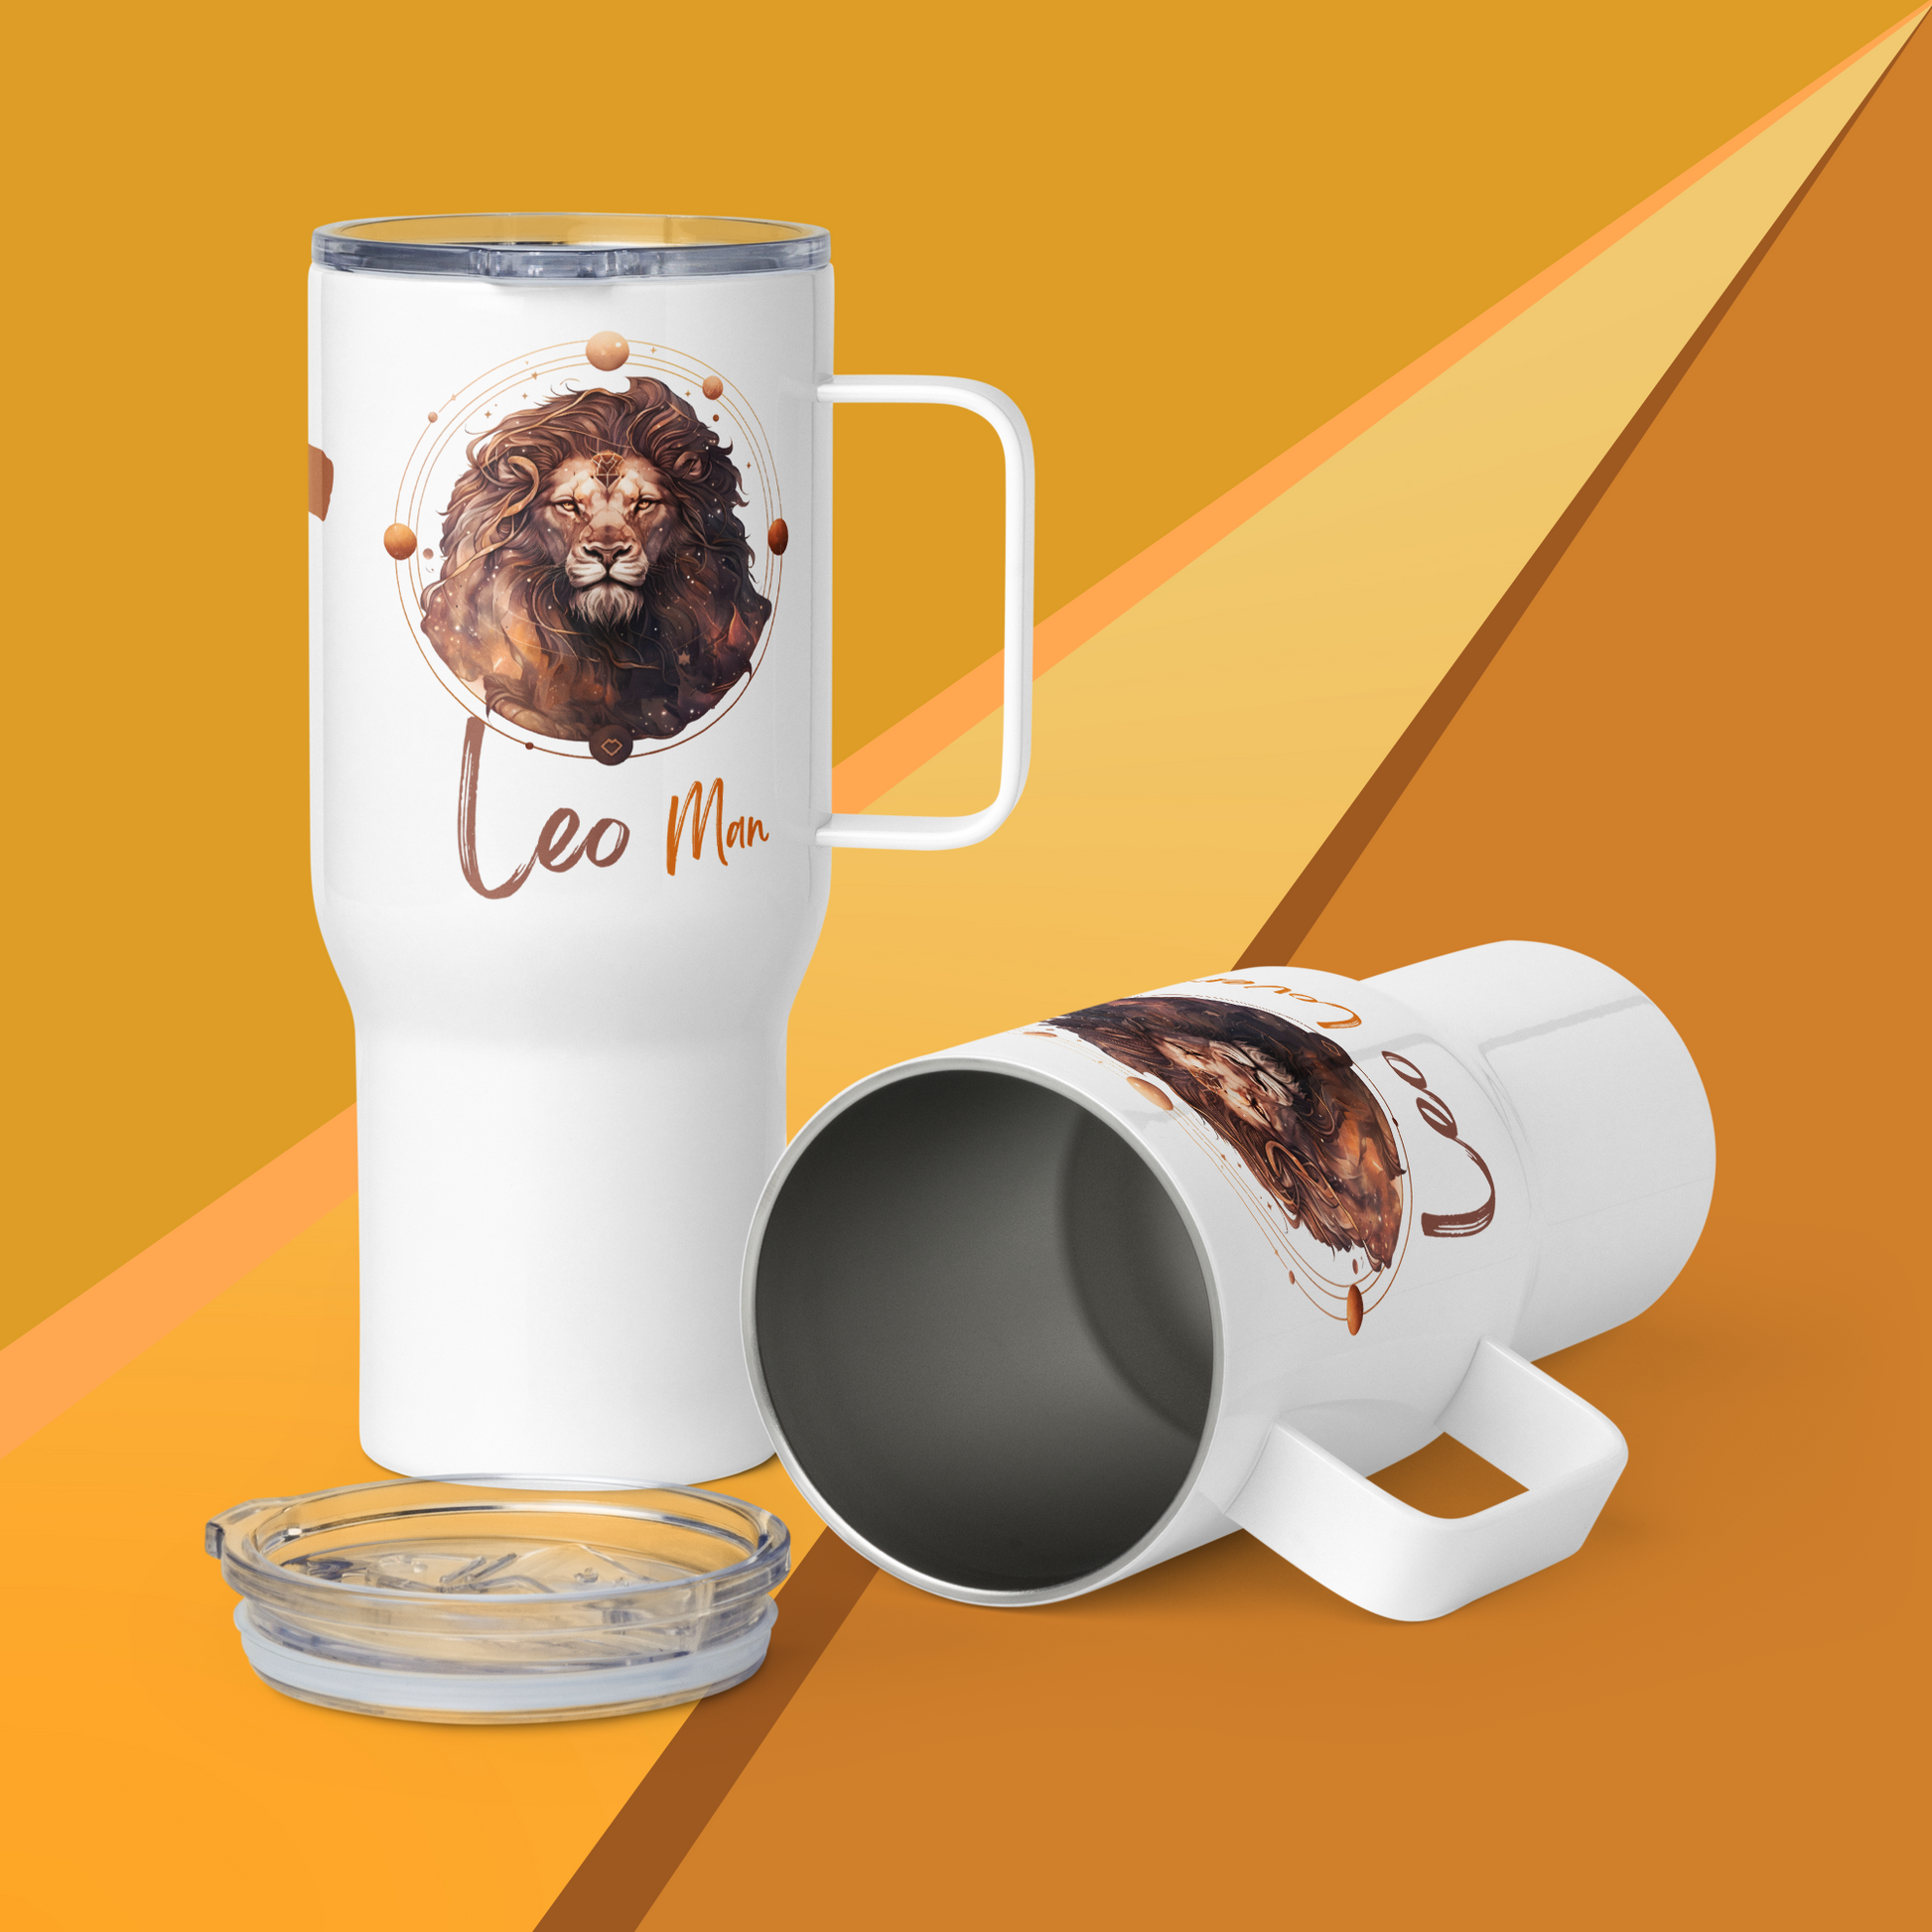 This “Leo Man” 25oz stainless steel travel mug has a vibrant gold and brown lion’s head and is personalized with a name.